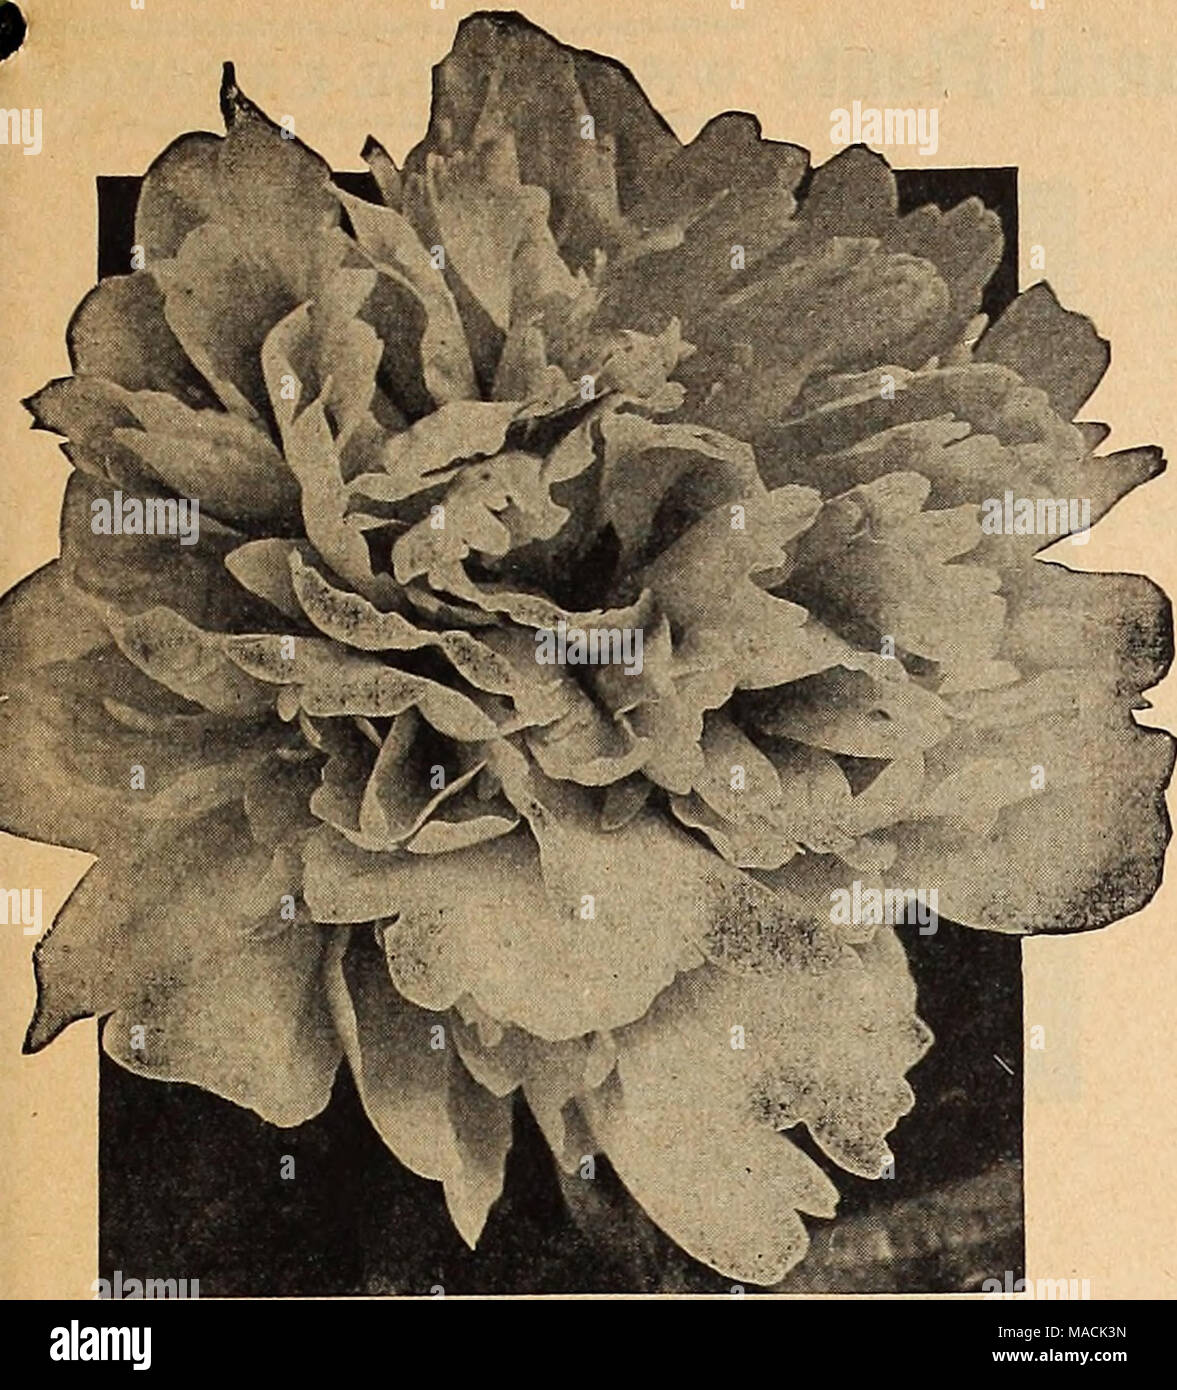 . Dreer's wholesale catalog for florists and market gardeners : 1942 winter spring summer . Double Herbaceous Peony Double Herbaceous Peonies Each Per 100 Baroness Schroeder (9.0). A tall mid- season Peony with large, globular, flesh white blooms $0 43 $40 00 Edulis Superba (7.6). This is the only Peony offered that is rated under 8, and there is no reason why it should carry this low rating as it is really a good Peony—early, free-flowering, and a fine cutflower in the dark pink class 21 18 00 Felix Crousse (8.4). Late mid-season red Peony. Probably the largest seller of all red Peonies 23 20 Stock Photo